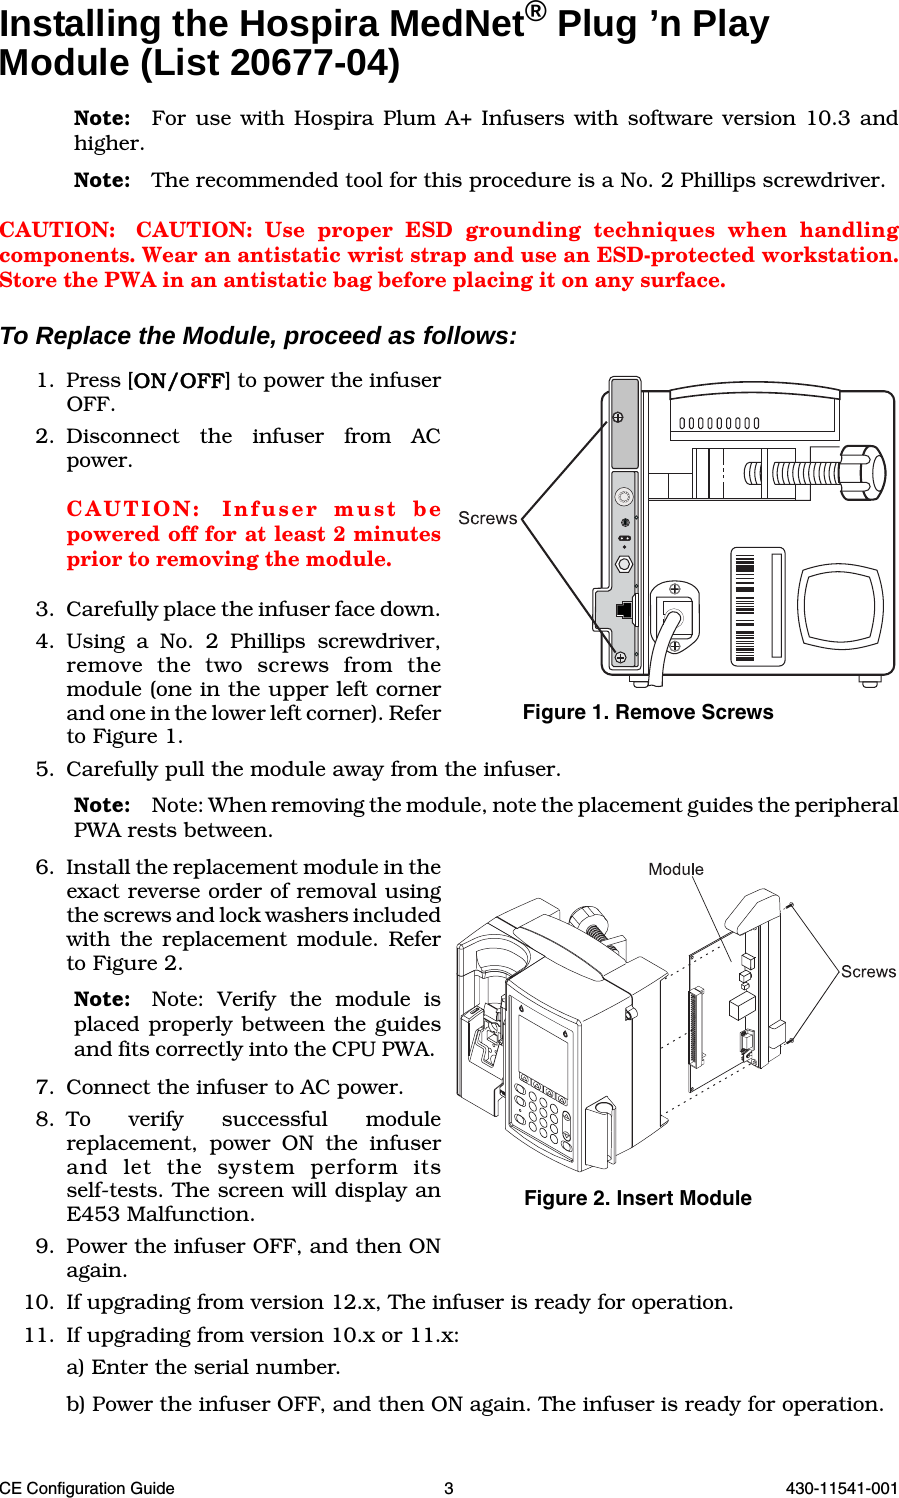 CE Configuration Guide 3 430-11541-001Installing the Hospira MedNet® Plug ’n Play Module (List 20677-04)Note: For use with Hospira Plum A+ Infusers with software version 10.3 andhigher.Note: The recommended tool for this procedure is a No. 2 Phillips screwdriver.CAUTION: CAUTION: Use proper ESD grounding techniques when handlingcomponents. Wear an antistatic wrist strap and use an ESD-protected workstation.Store the PWA in an antistatic bag before placing it on any surface.To Replace the Module, proceed as follows:1. Press [ON/OFF] to power the infuserOFF. 2. Disconnect the infuser from ACpower.CAUTION: Infuser must bepowered off for at least 2 minutesprior to removing the module.3. Carefully place the infuser face down.4. Using a No. 2 Phillips screwdriver,remove the two screws from themodule (one in the upper left cornerand one in the lower left corner). Referto Figure 1.5. Carefully pull the module away from the infuser. Note: Note: When removing the module, note the placement guides the peripheralPWA rests between.6. Install the replacement module in theexact reverse order of removal usingthe screws and lock washers includedwith the replacement module. Referto Figure 2.Note: Note: Verify the module isplaced properly between the guidesand fits correctly into the CPU PWA. 7. Connect the infuser to AC power. 8. To verify successful modulereplacement, power ON the infuserand let the system perform itsself-tests. The screen will display anE453 Malfunction. 9. Power the infuser OFF, and then ONagain. 10. If upgrading from version 12.x, The infuser is ready for operation.11. If upgrading from version 10.x or 11.x:a) Enter the serial number. b) Power the infuser OFF, and then ON again. The infuser is ready for operation.Figure 1. Remove ScrewsFigure 2. Insert Module